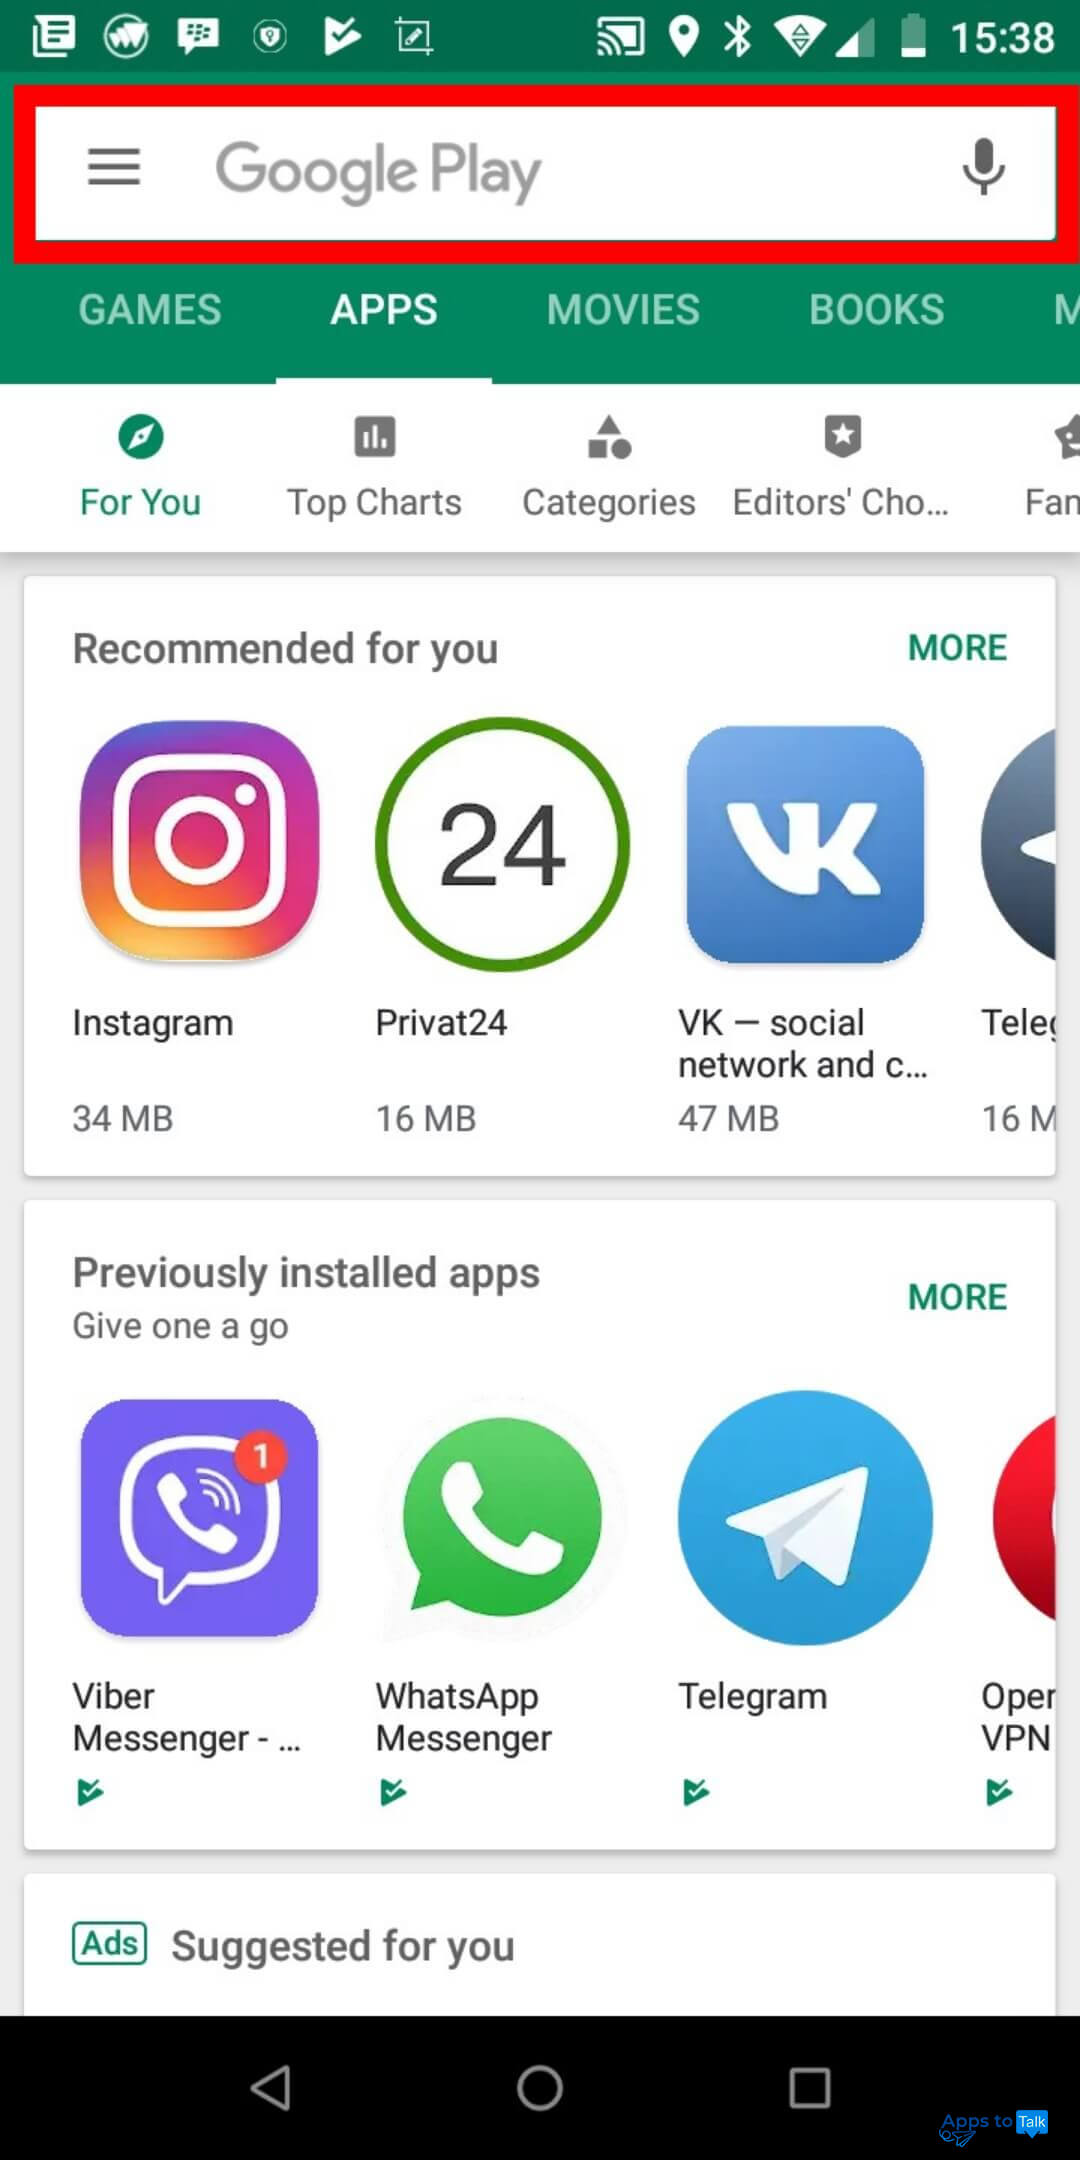 How to use Line on Android: have a look at these instructions